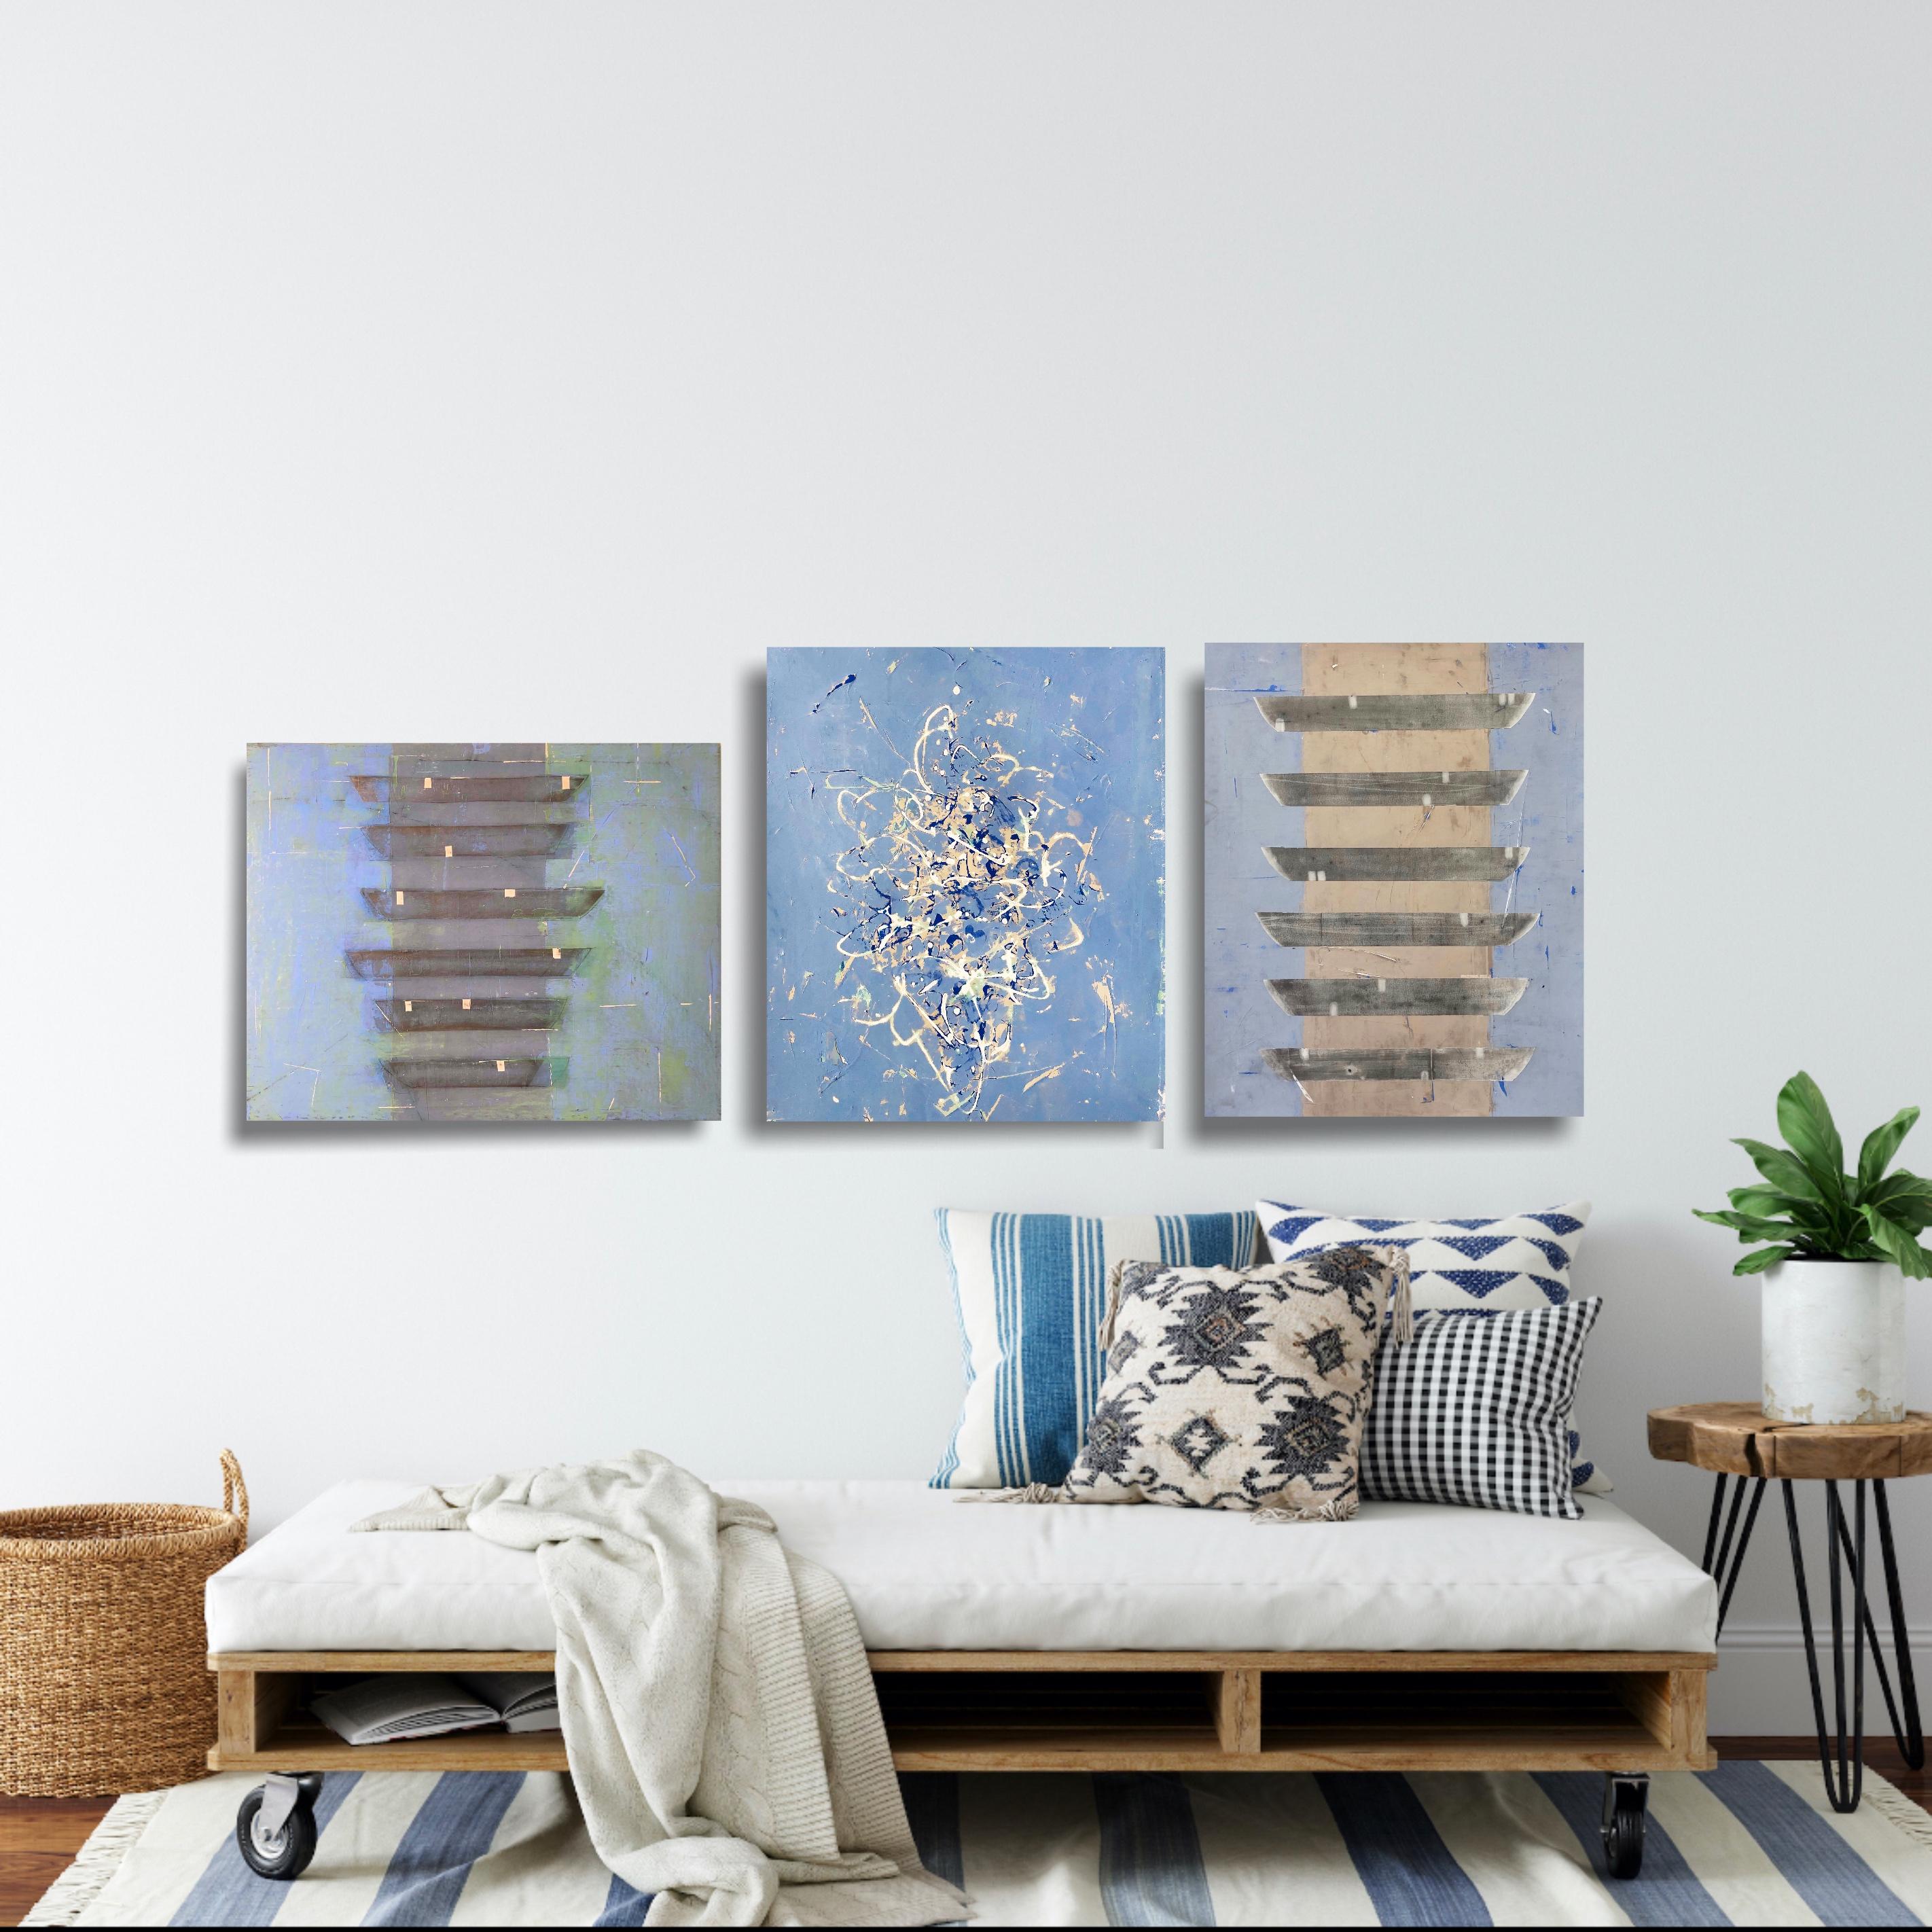 The soft blue and white gestural abstract painting is one of the looser and more organic compositions by the artist Shira Toren. This painting is inspired by vintage pottery originated in Delft, The Netherlands. It is constructed with many